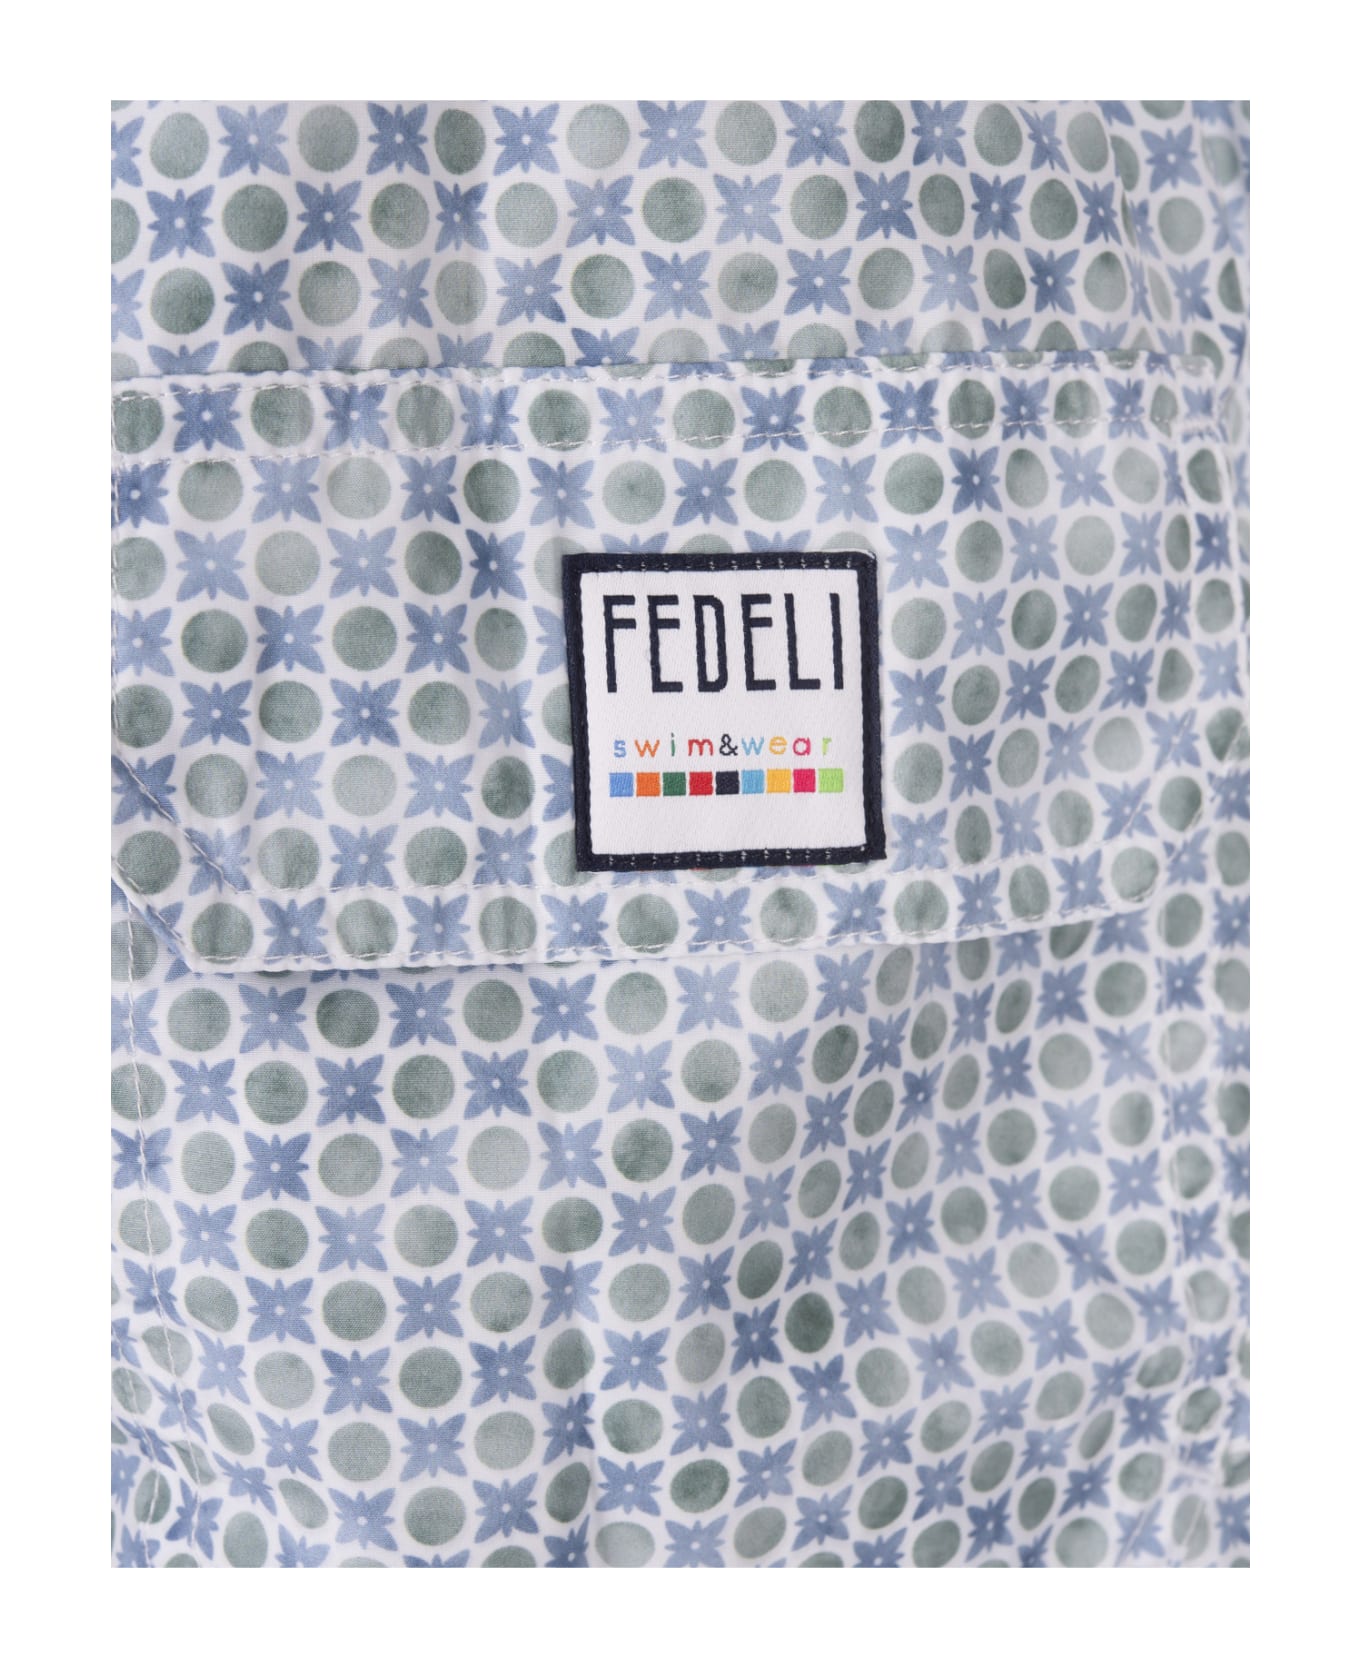 Fedeli Swim Shorts With Micro Pattern Of Polka Dots And Flowers - Green